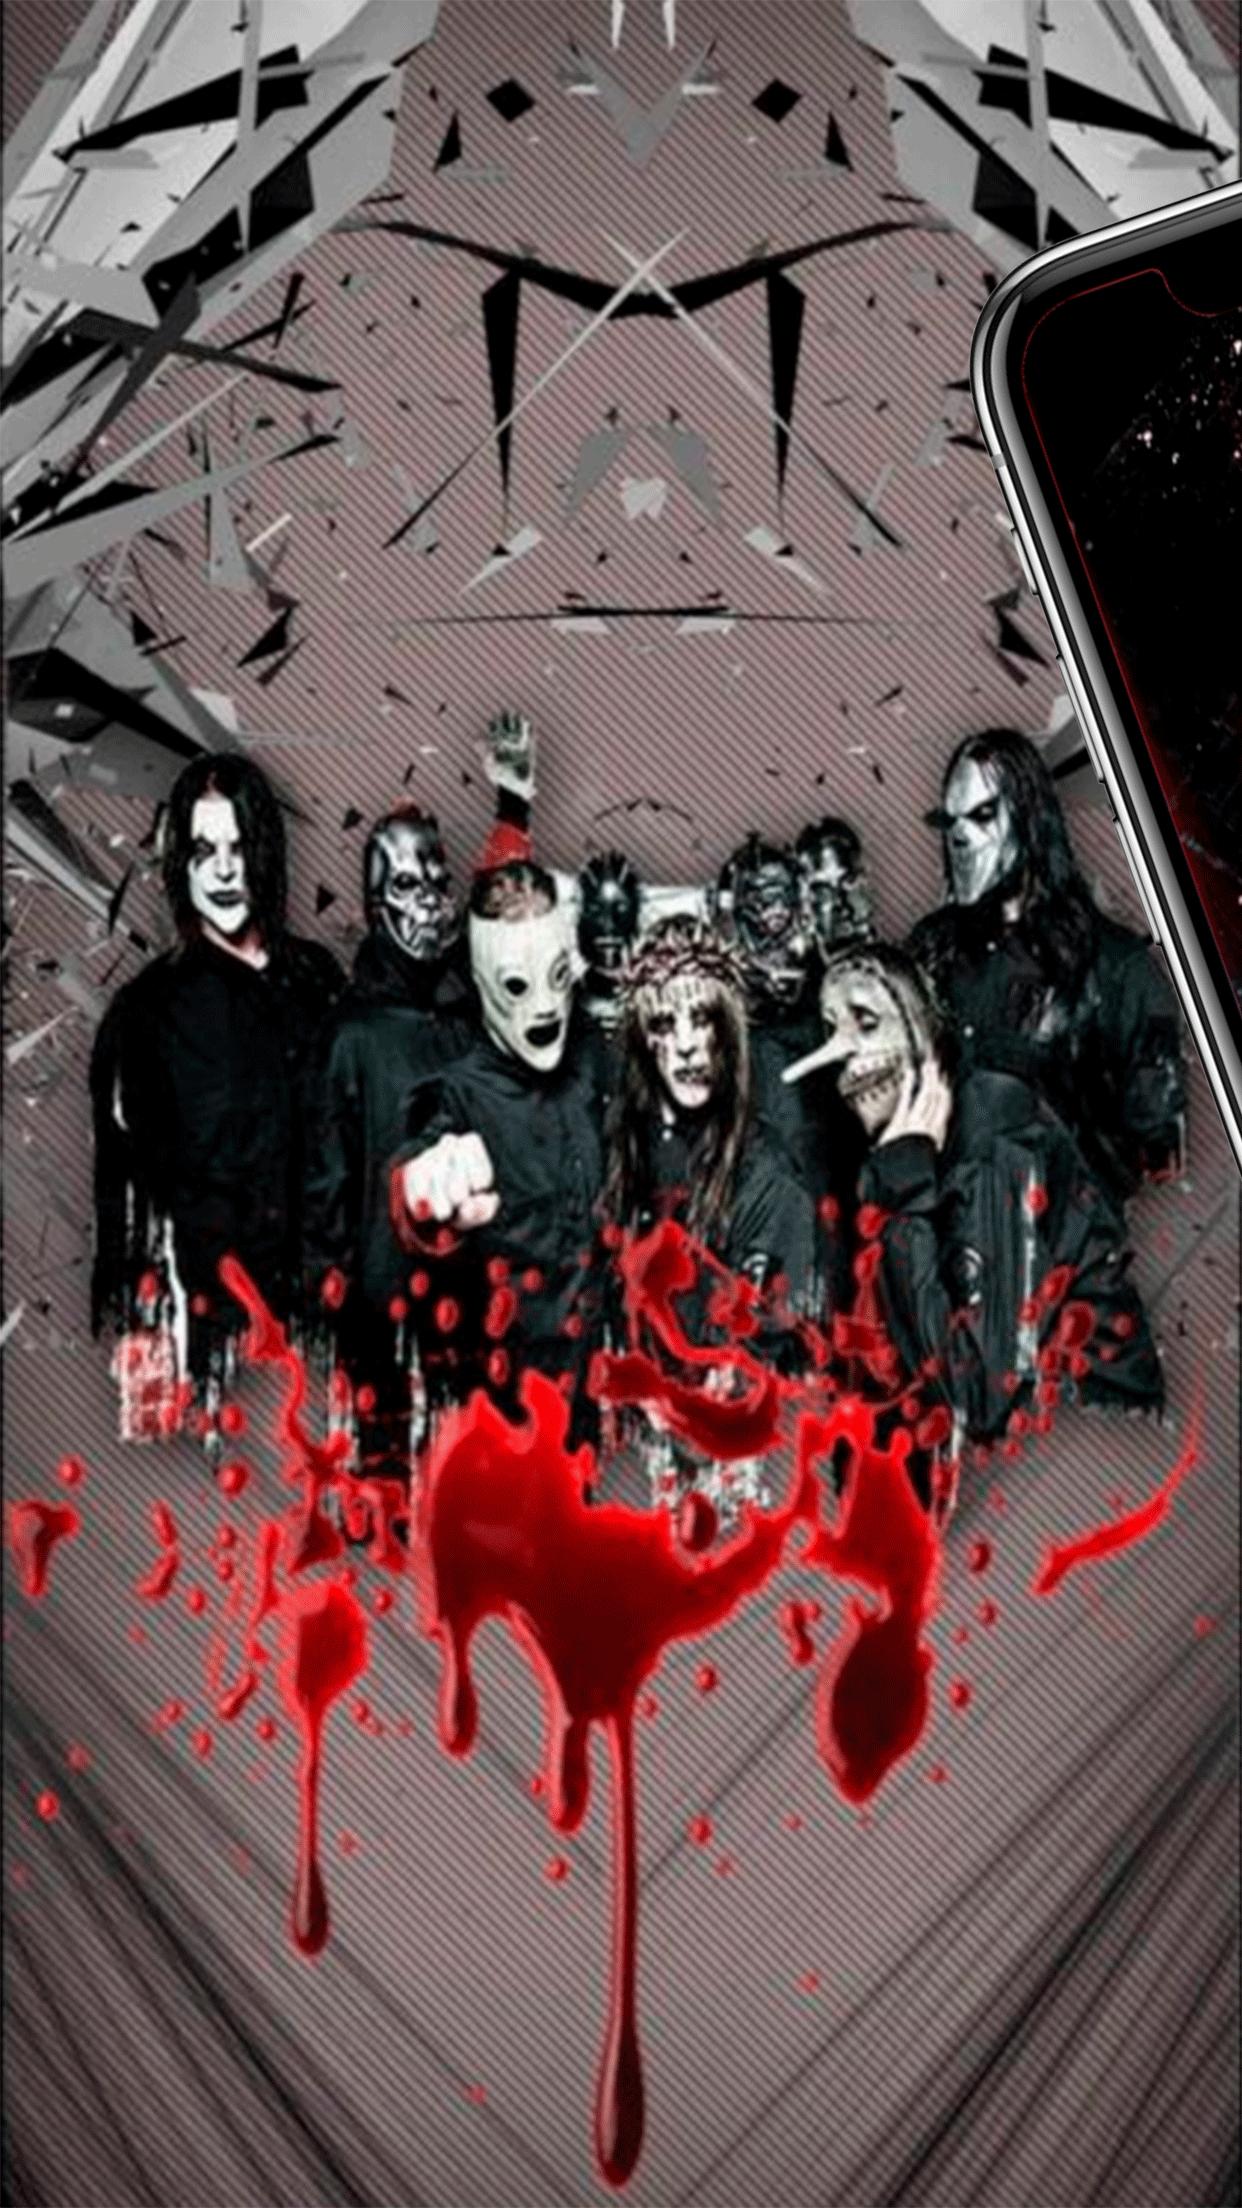 Slipknot Wallpaper Hd And Backgrounds Free For Android Apk Download